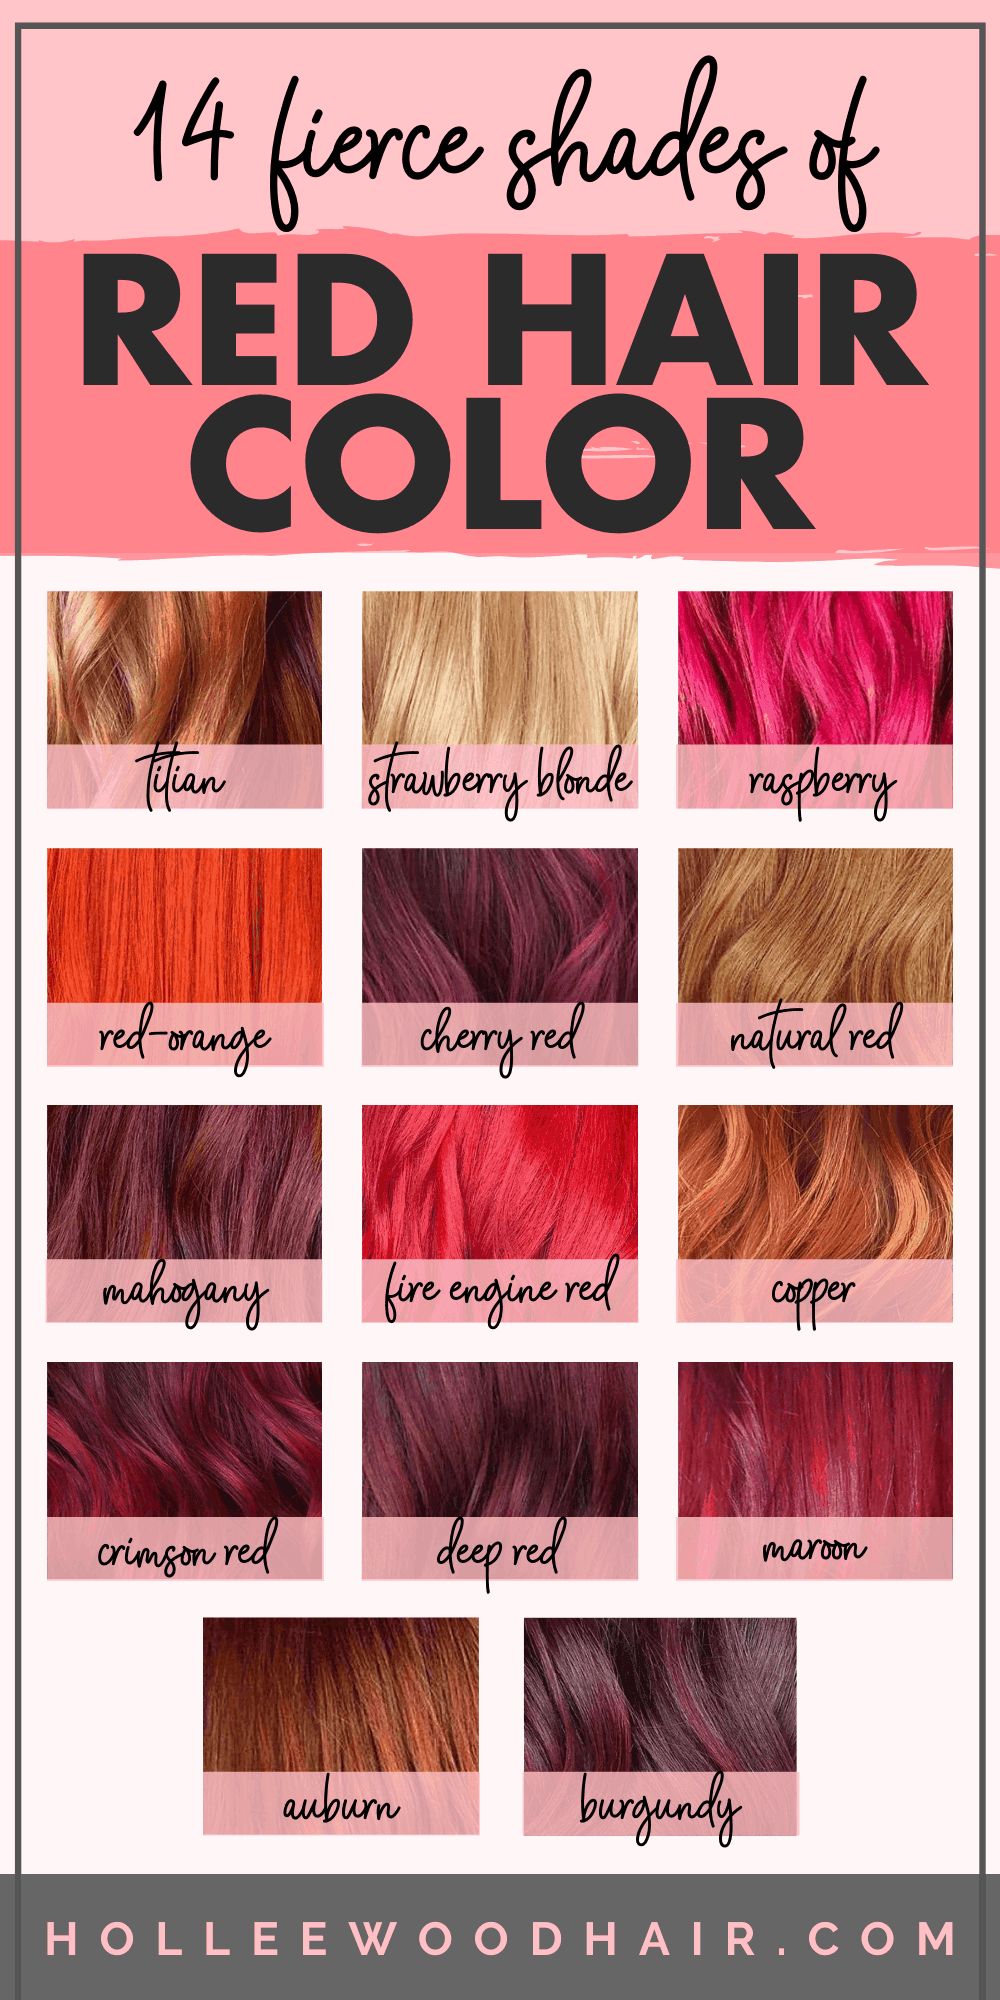 shades of red hair color